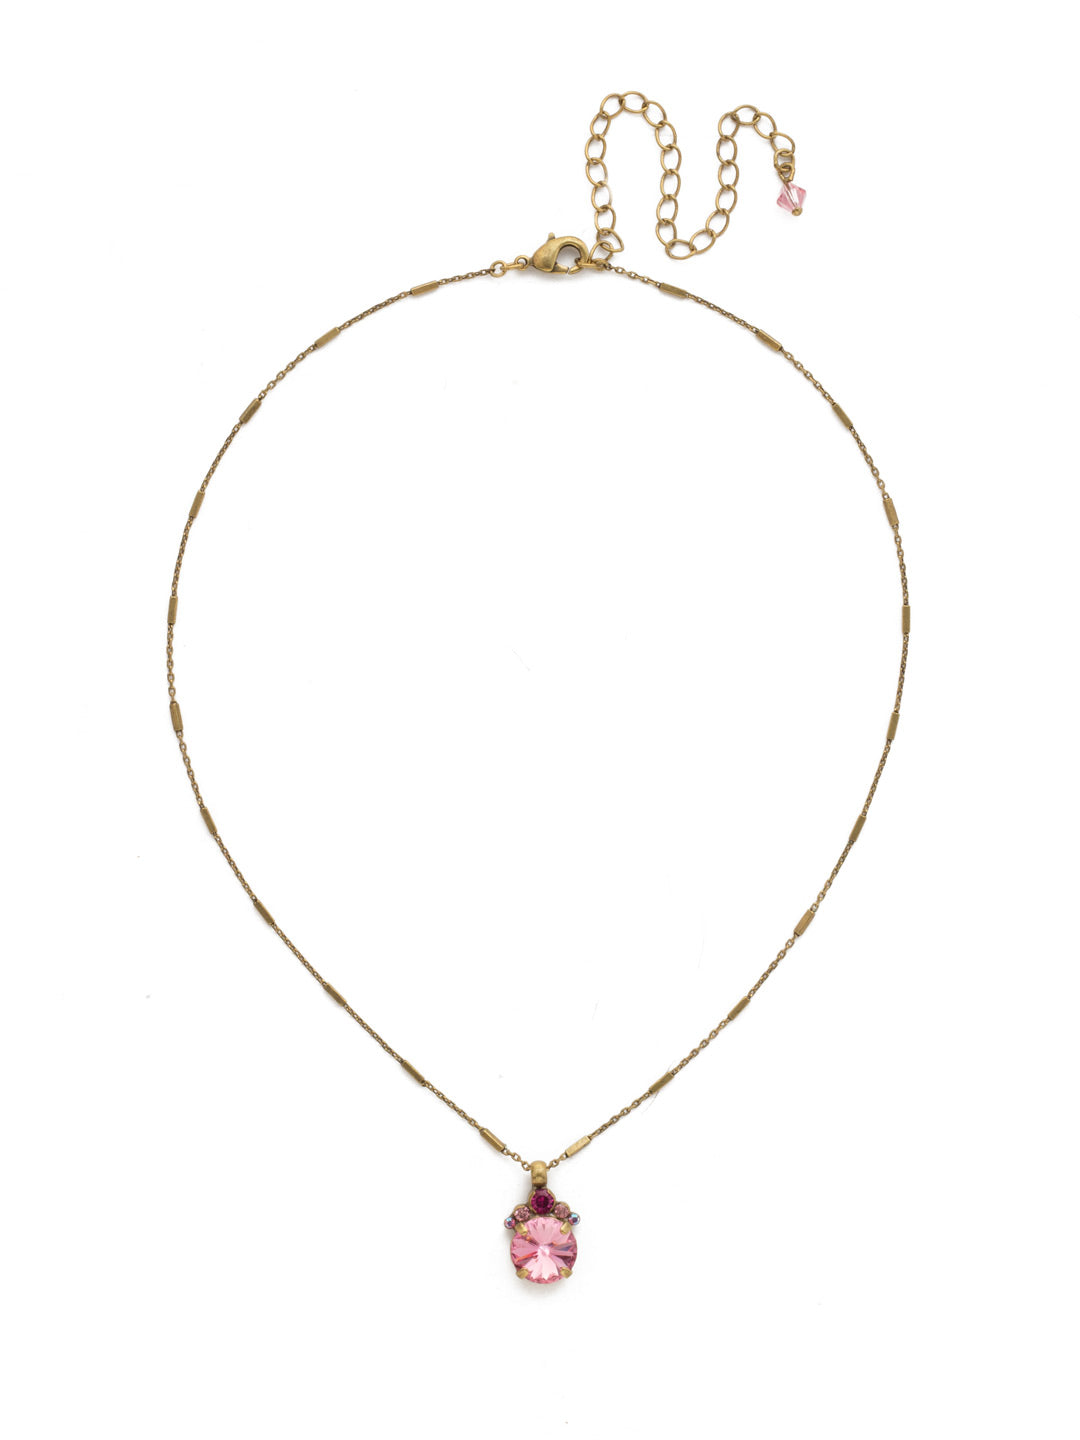 Crowning Around Necklace - NDN78AGRO - <p>Show them you're serious about sparkle with this demure pendant that features a round rivoli crystal crowned with petite circular stones. From Sorrelli's Rose collection in our Antique Gold-tone finish.</p>